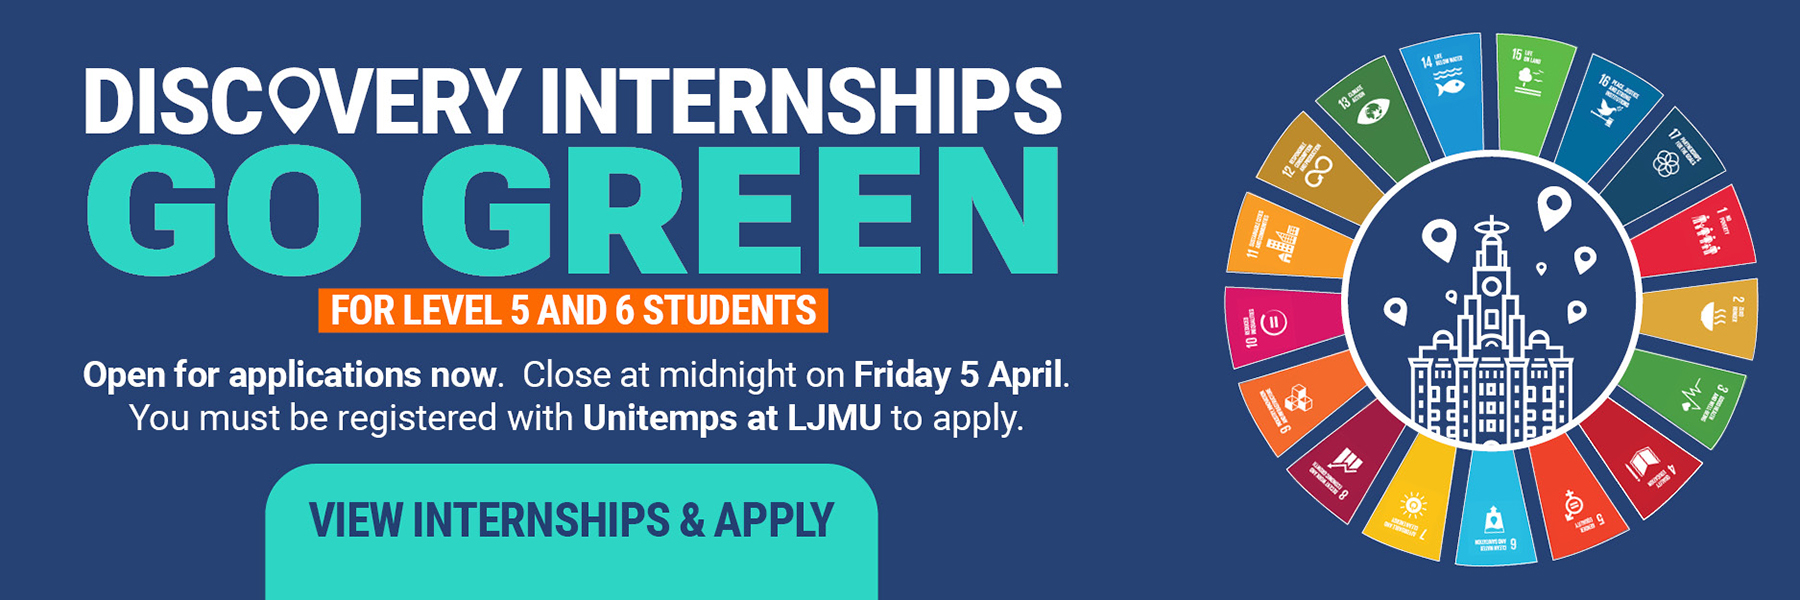 View and apply for the Discovery Internship Go Green for level 5 and 6 students - open for applicants now. Close at midnight on Friday 5 April. You must be registered with Unitemps to apply.